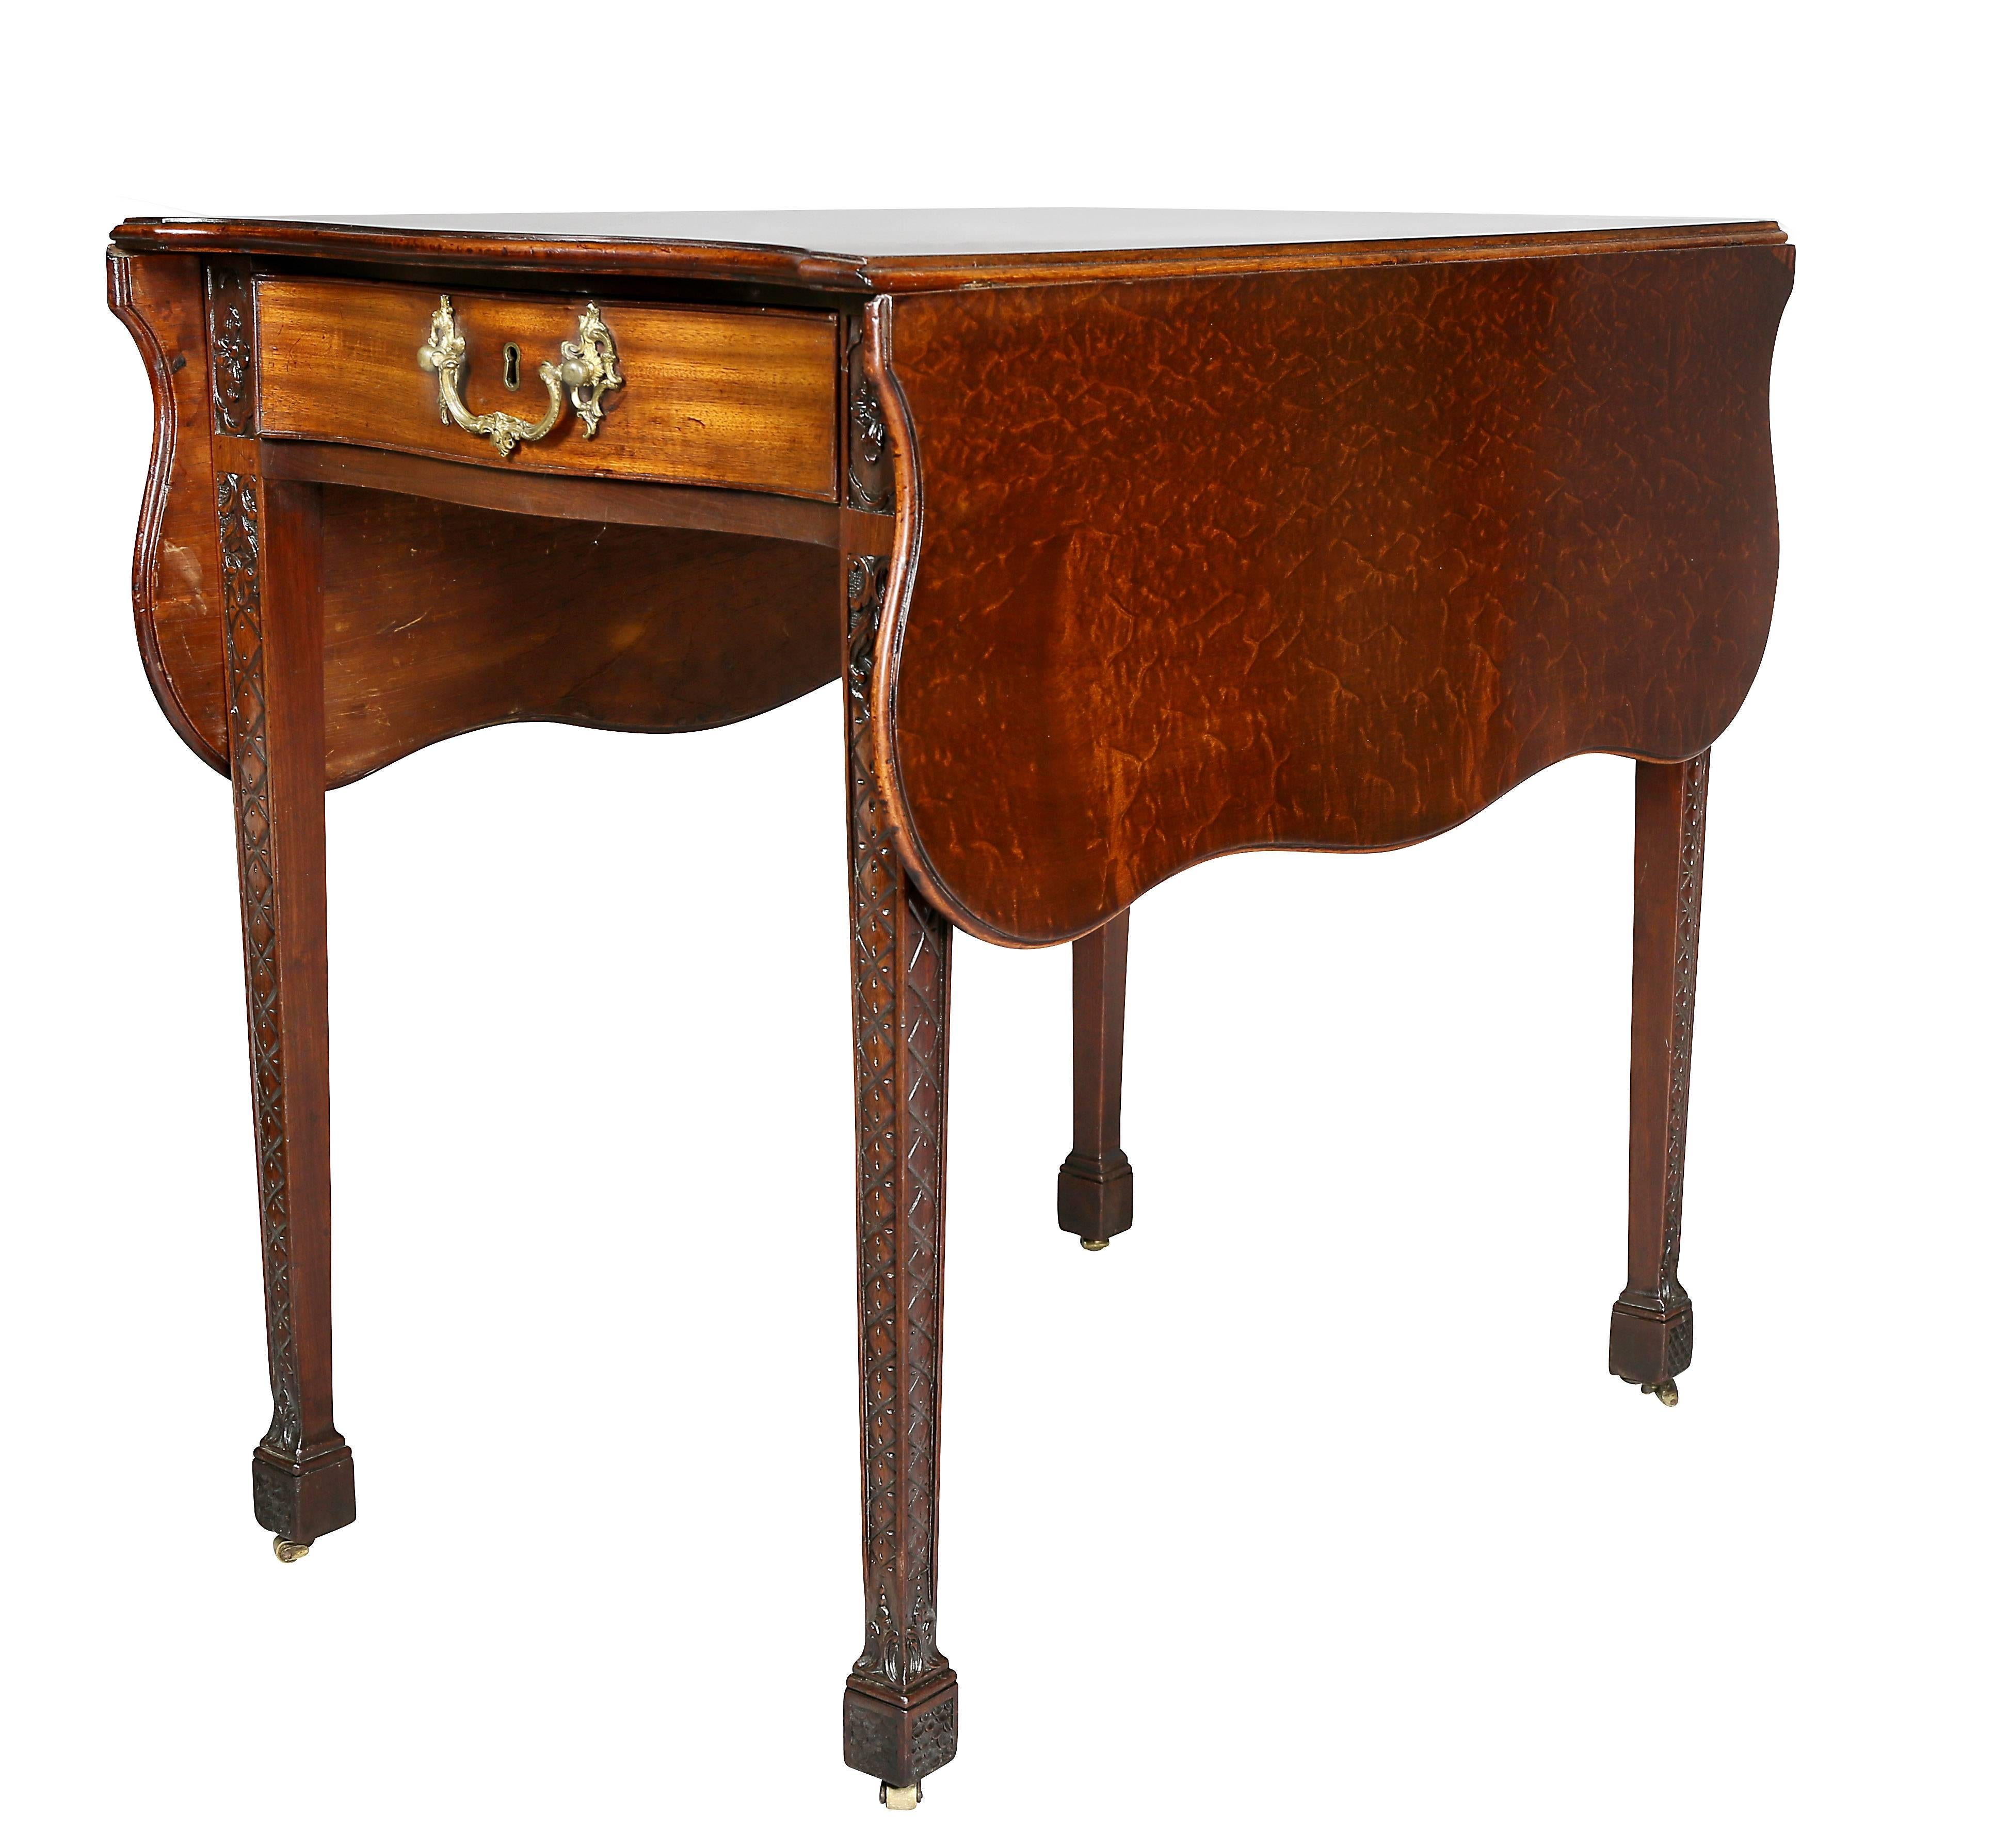 With a finely figured top resembling lacewood with serpentine leaves over a serpentine drawer and false drawer on reverse end. Original cast gilt bronze rocaille handles, carved square tapered legs ending on casters.